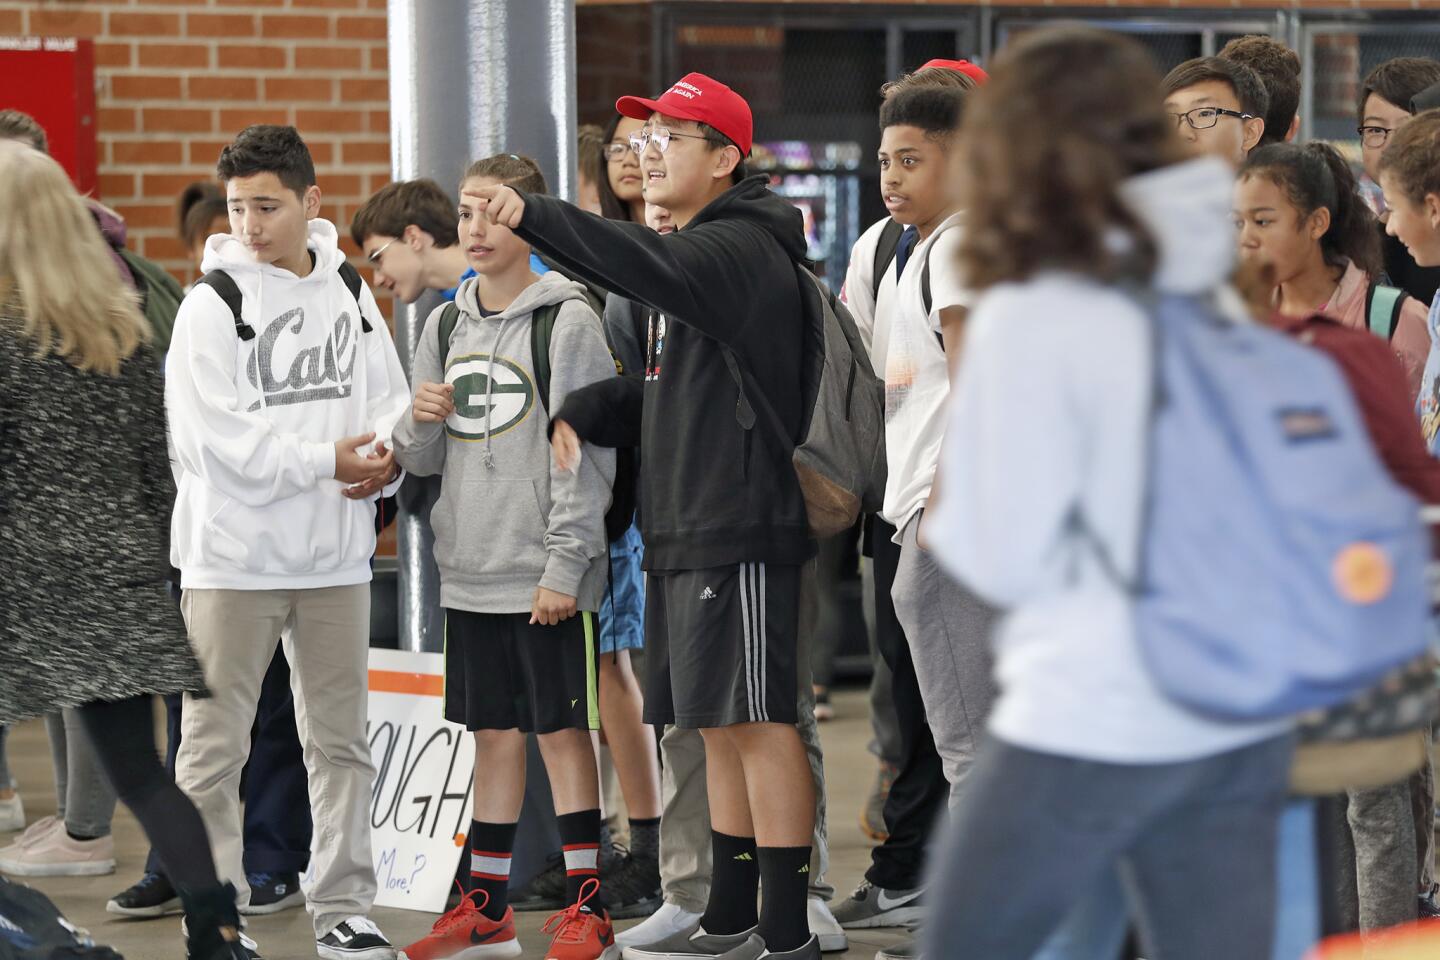 Photo Gallery: Rosemont Middle School “Die-Inevent" for stricter gun laws